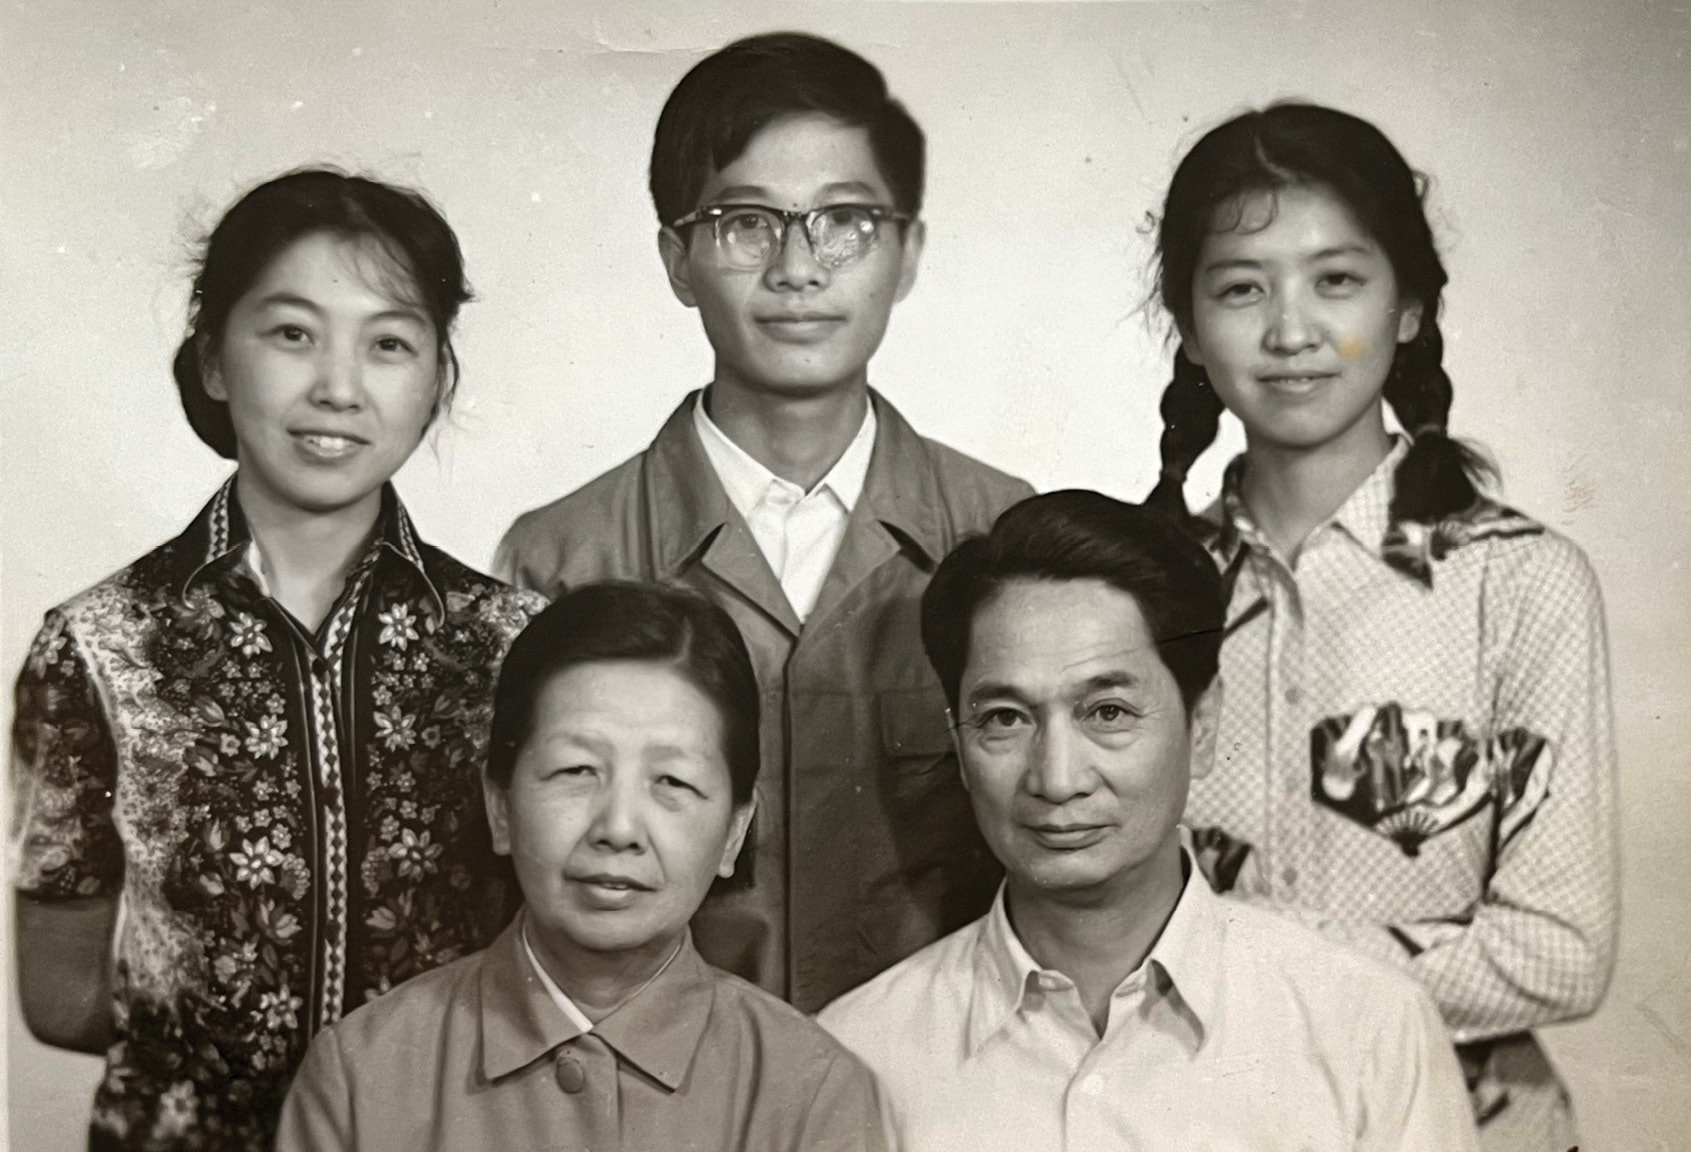 Beijing Beginnings: President Hsu’s parents, Yuchu Wang and Sifu Xu (front row), had college degrees, but educational opportunities for him and his sisters, Duoqing and Duohong, were squelched during Mao’s Cultural Revolution.